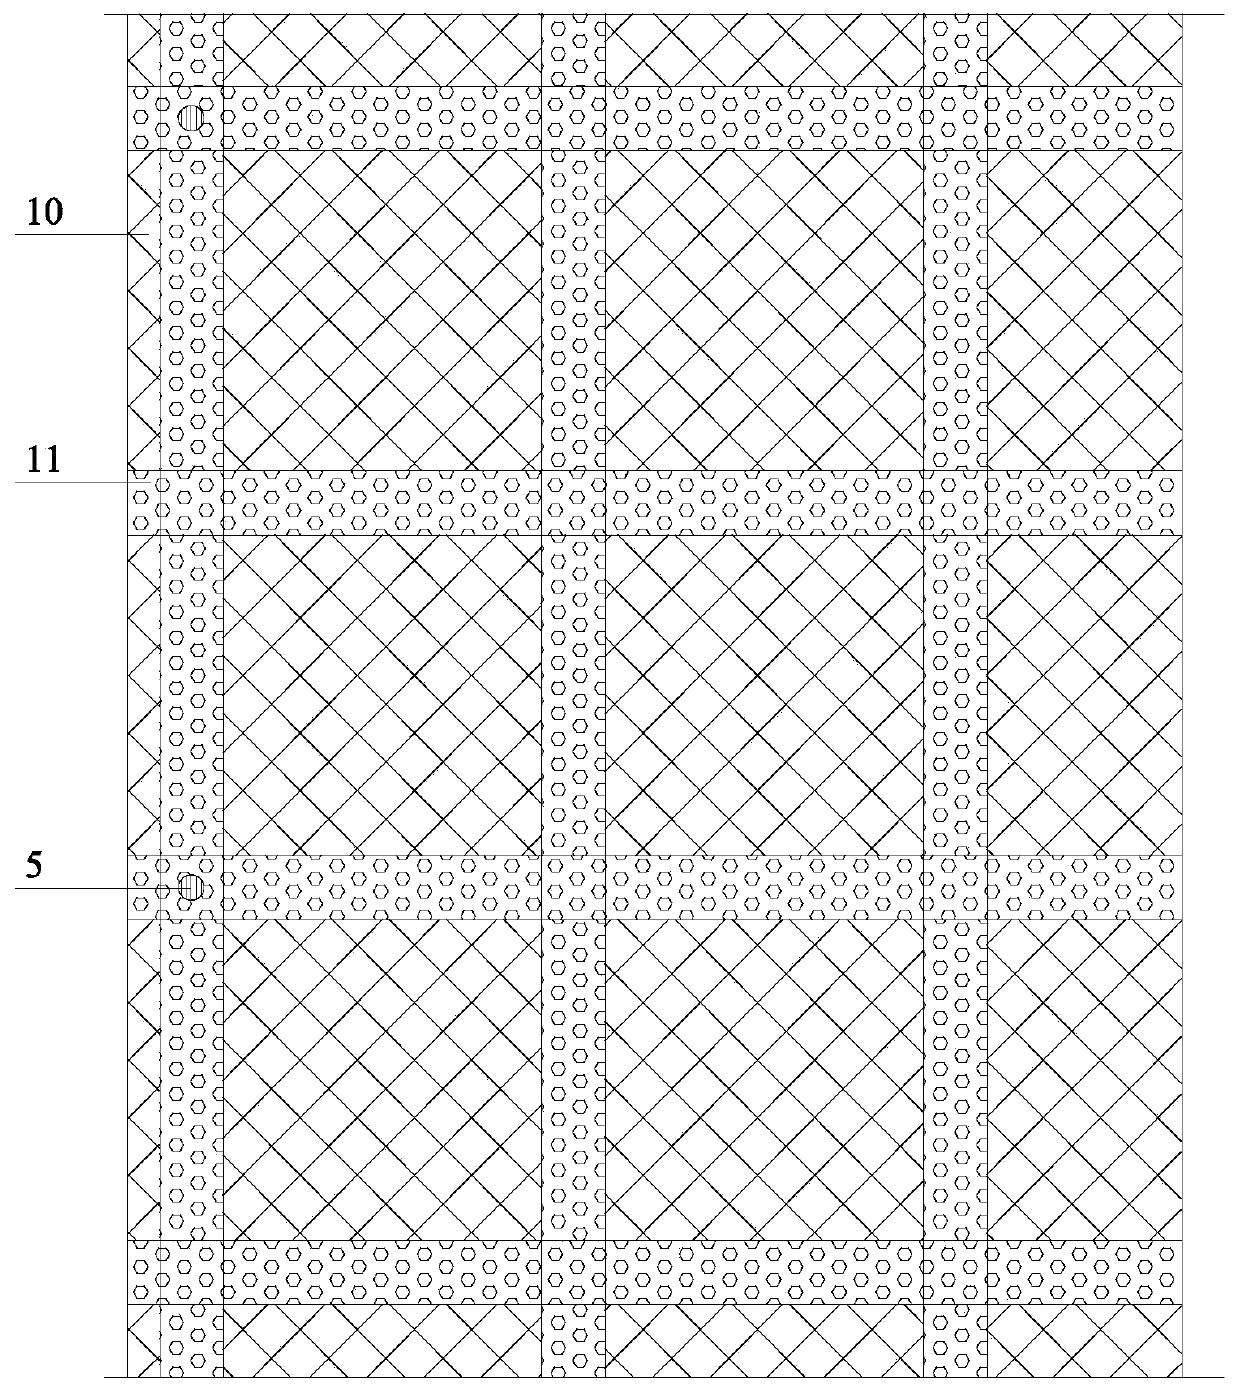 Construction method of invisible natural ventilation and drainage system for thermal insulation planting roof